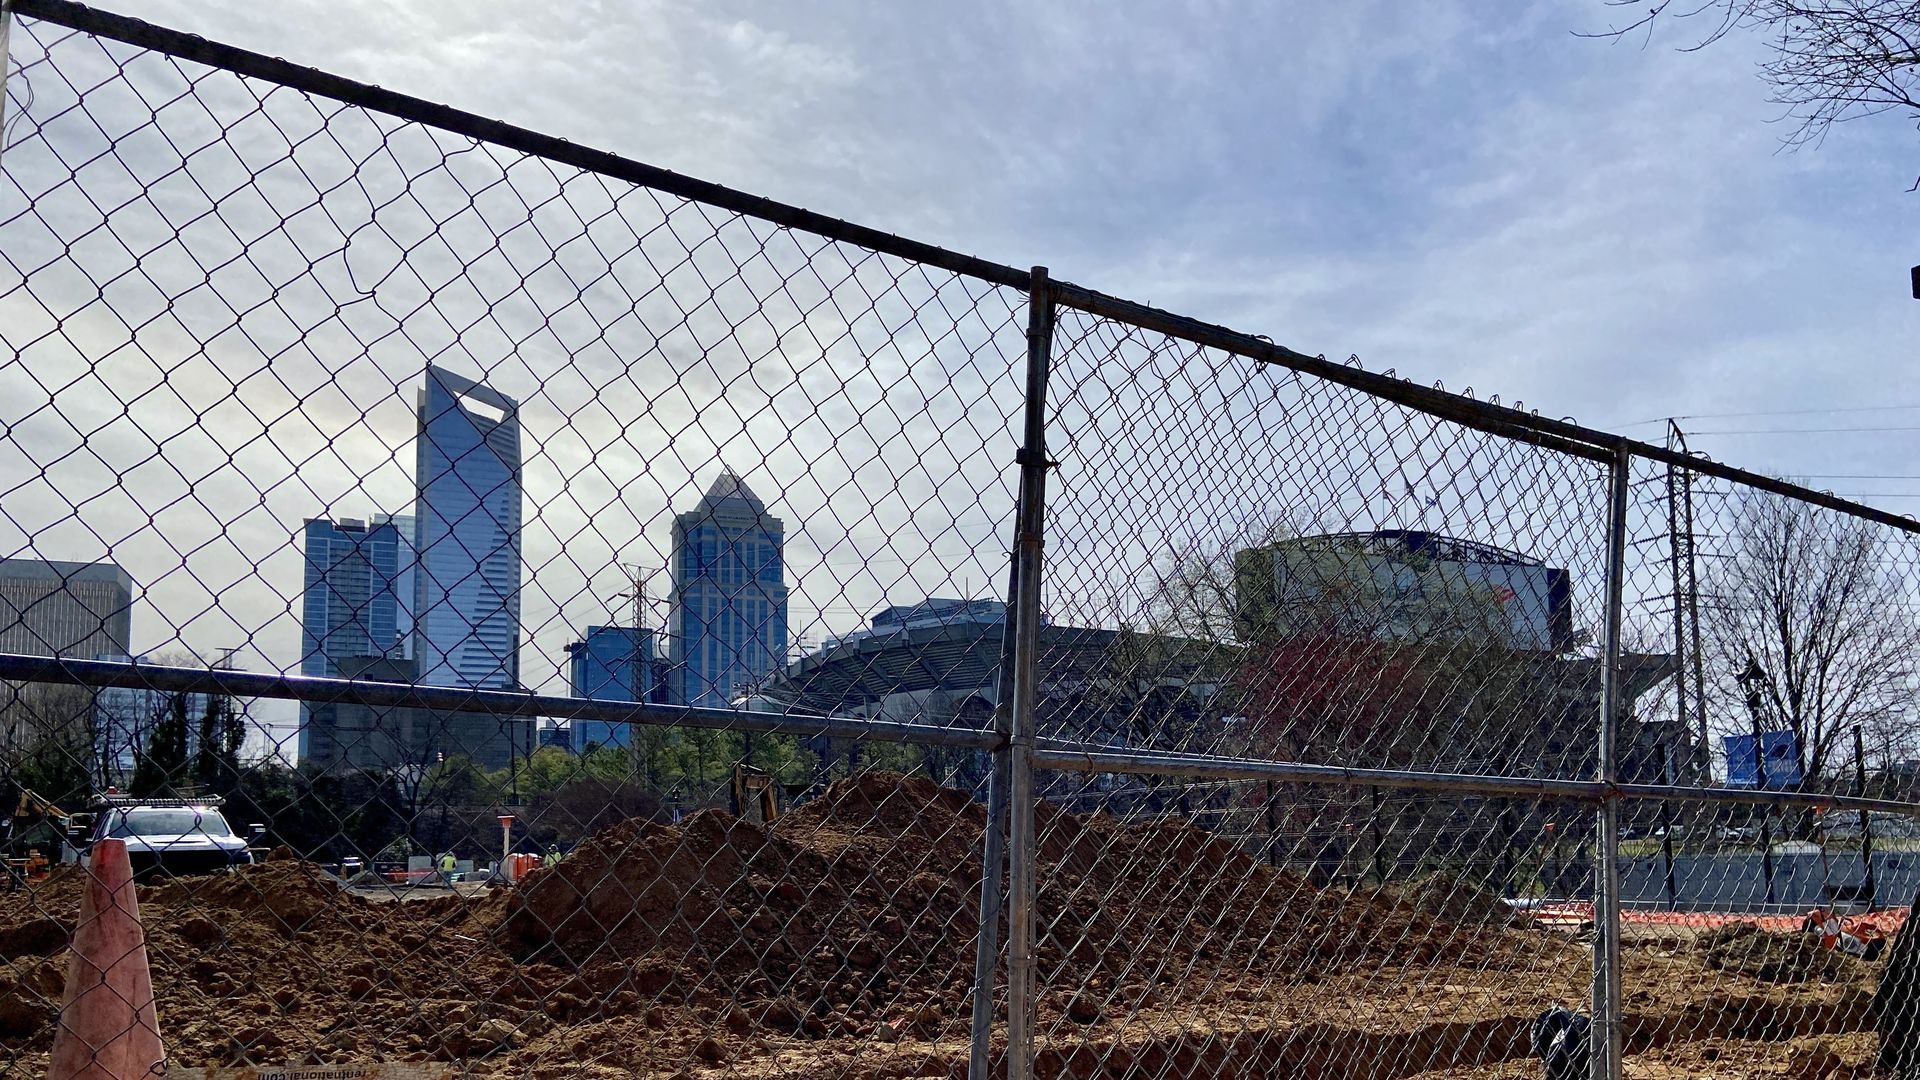 Construction on the Carolina Panthers practice site in Uptown Charlotte.